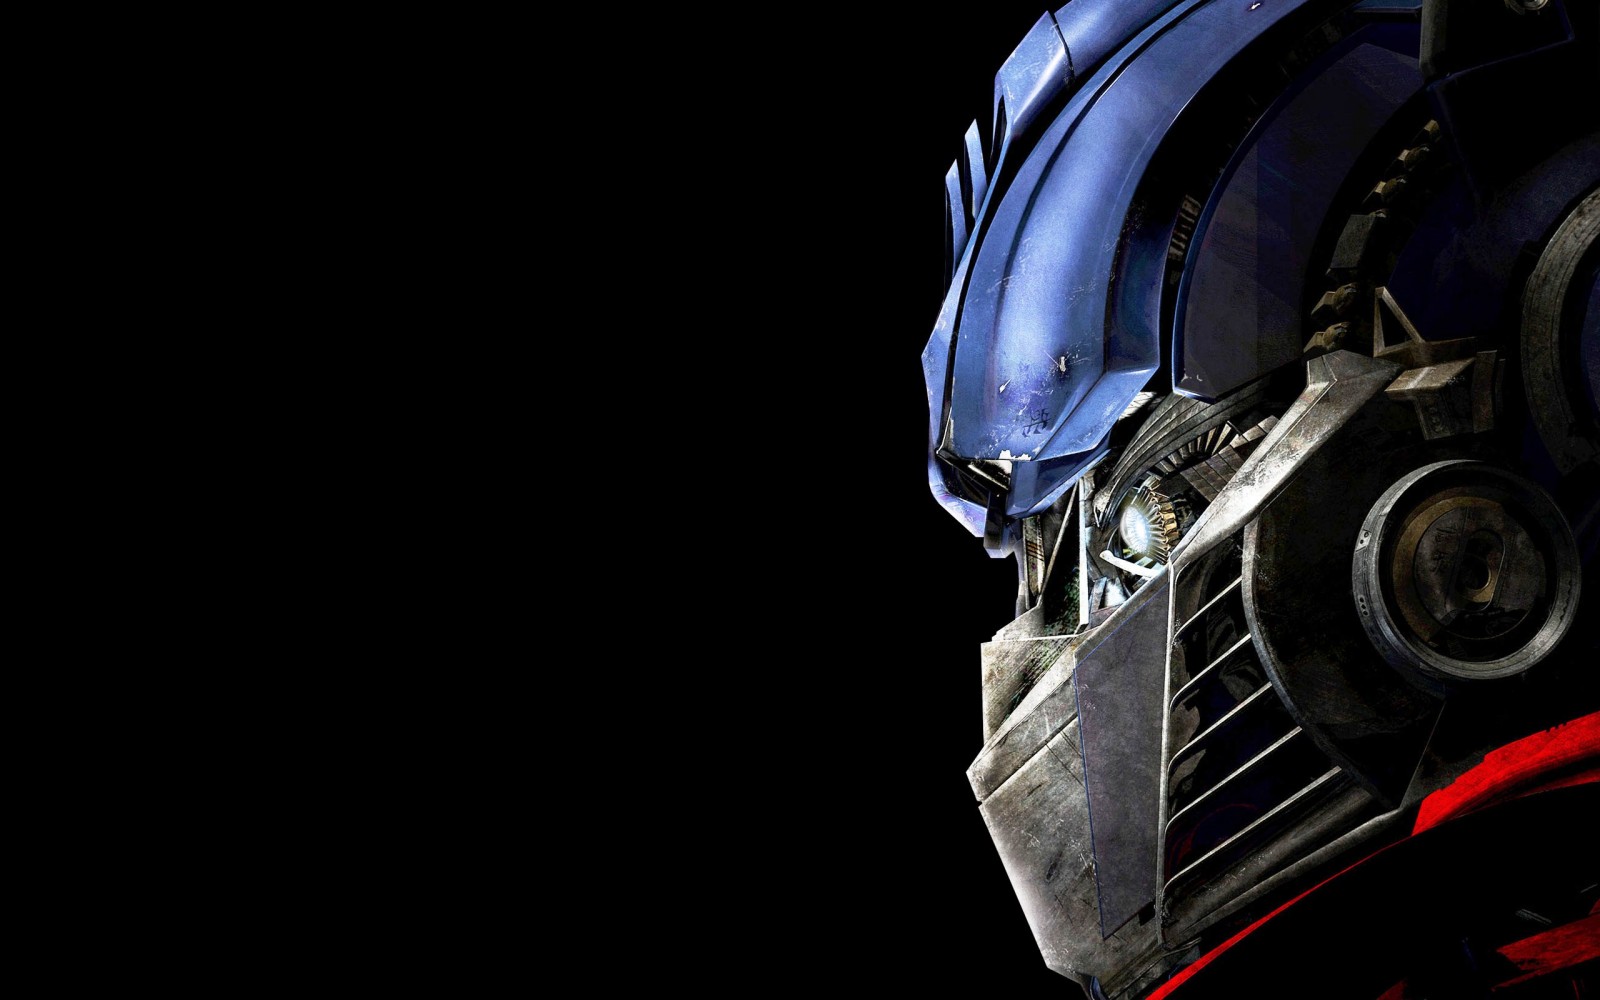 Transformers HD Wallpapers: Transformers HD Wallpapers